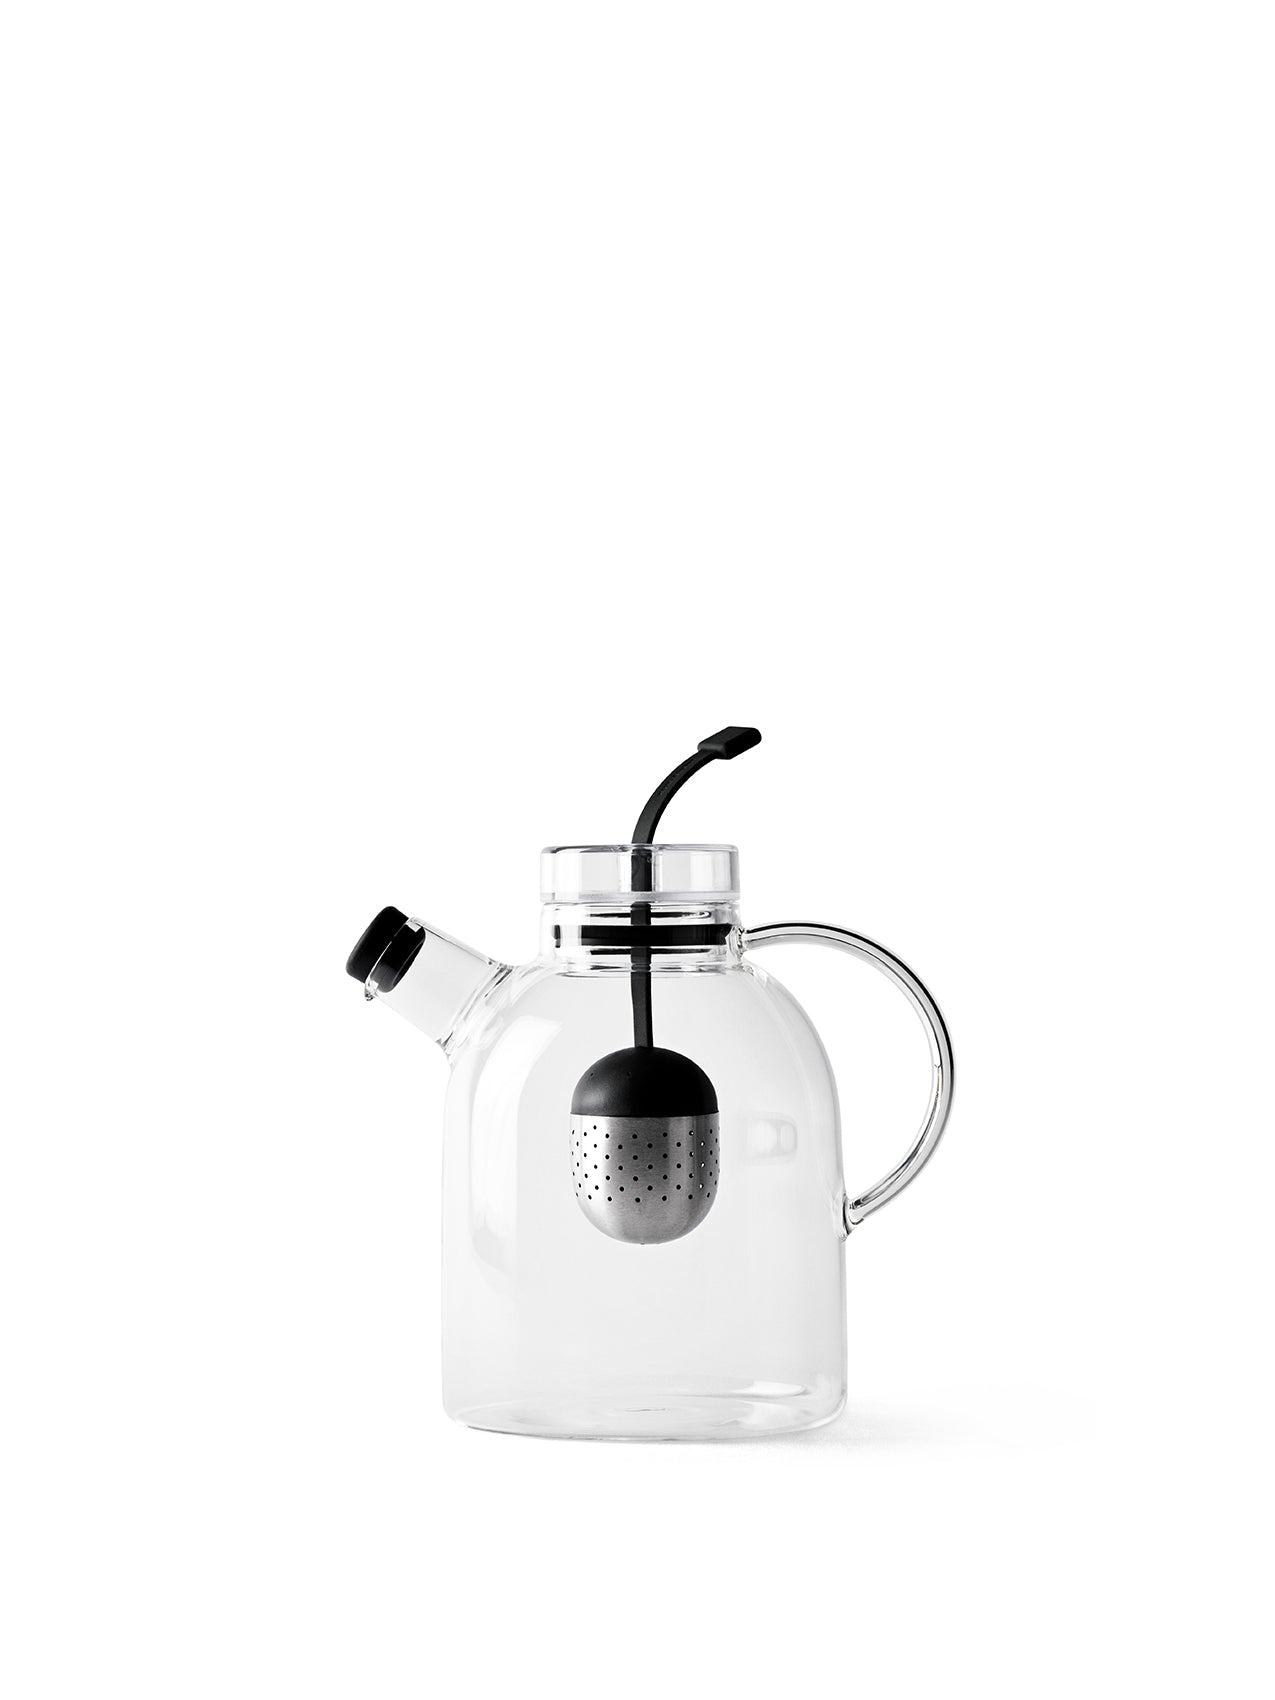 2 Electric Kettle And Teapot ( Glass)